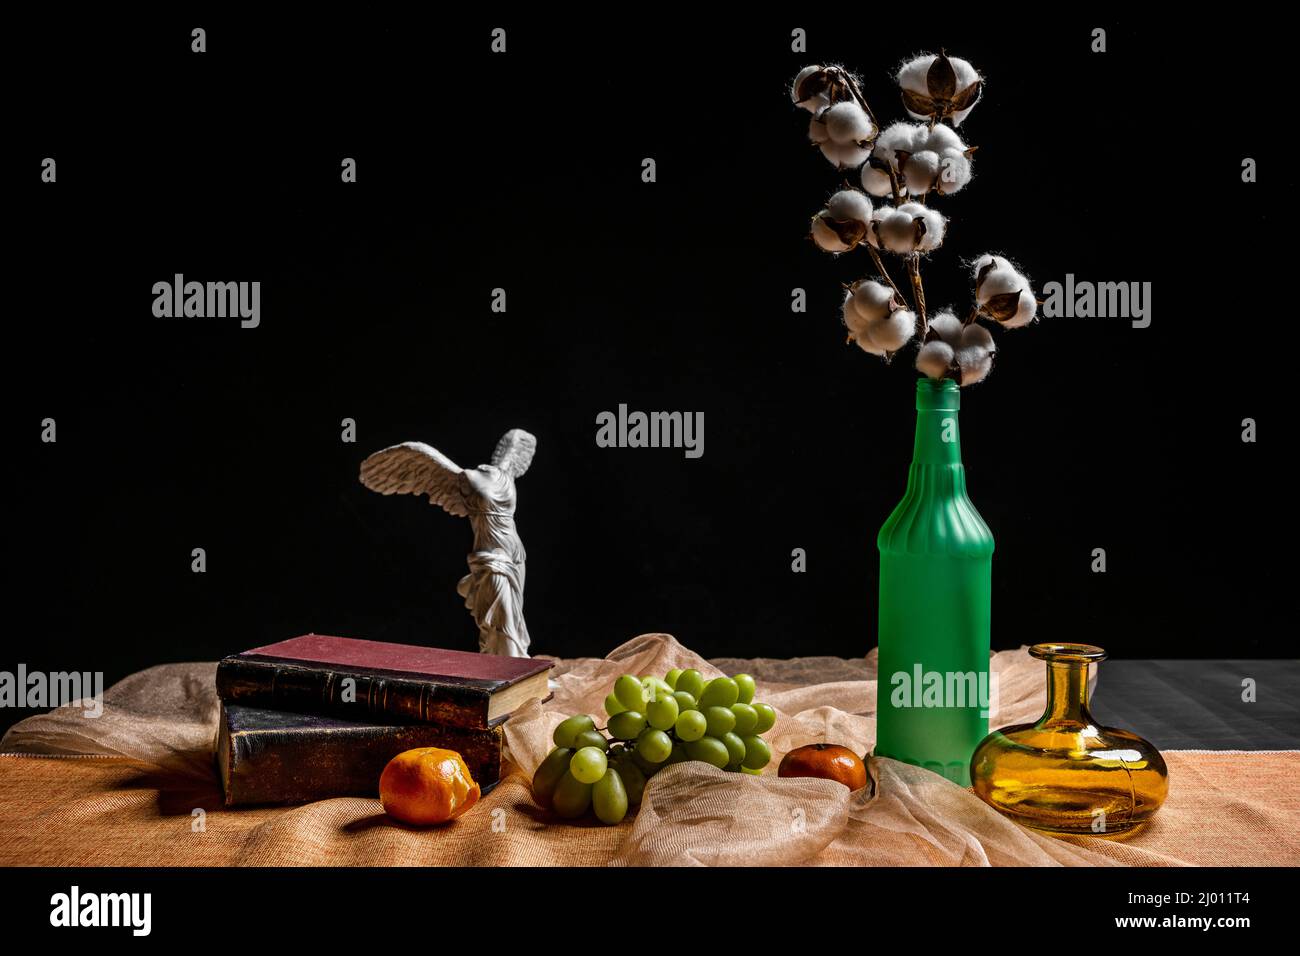 Still life with a cotton branch in a glass bottle with white grapes, glass jars and old books Stock Photo